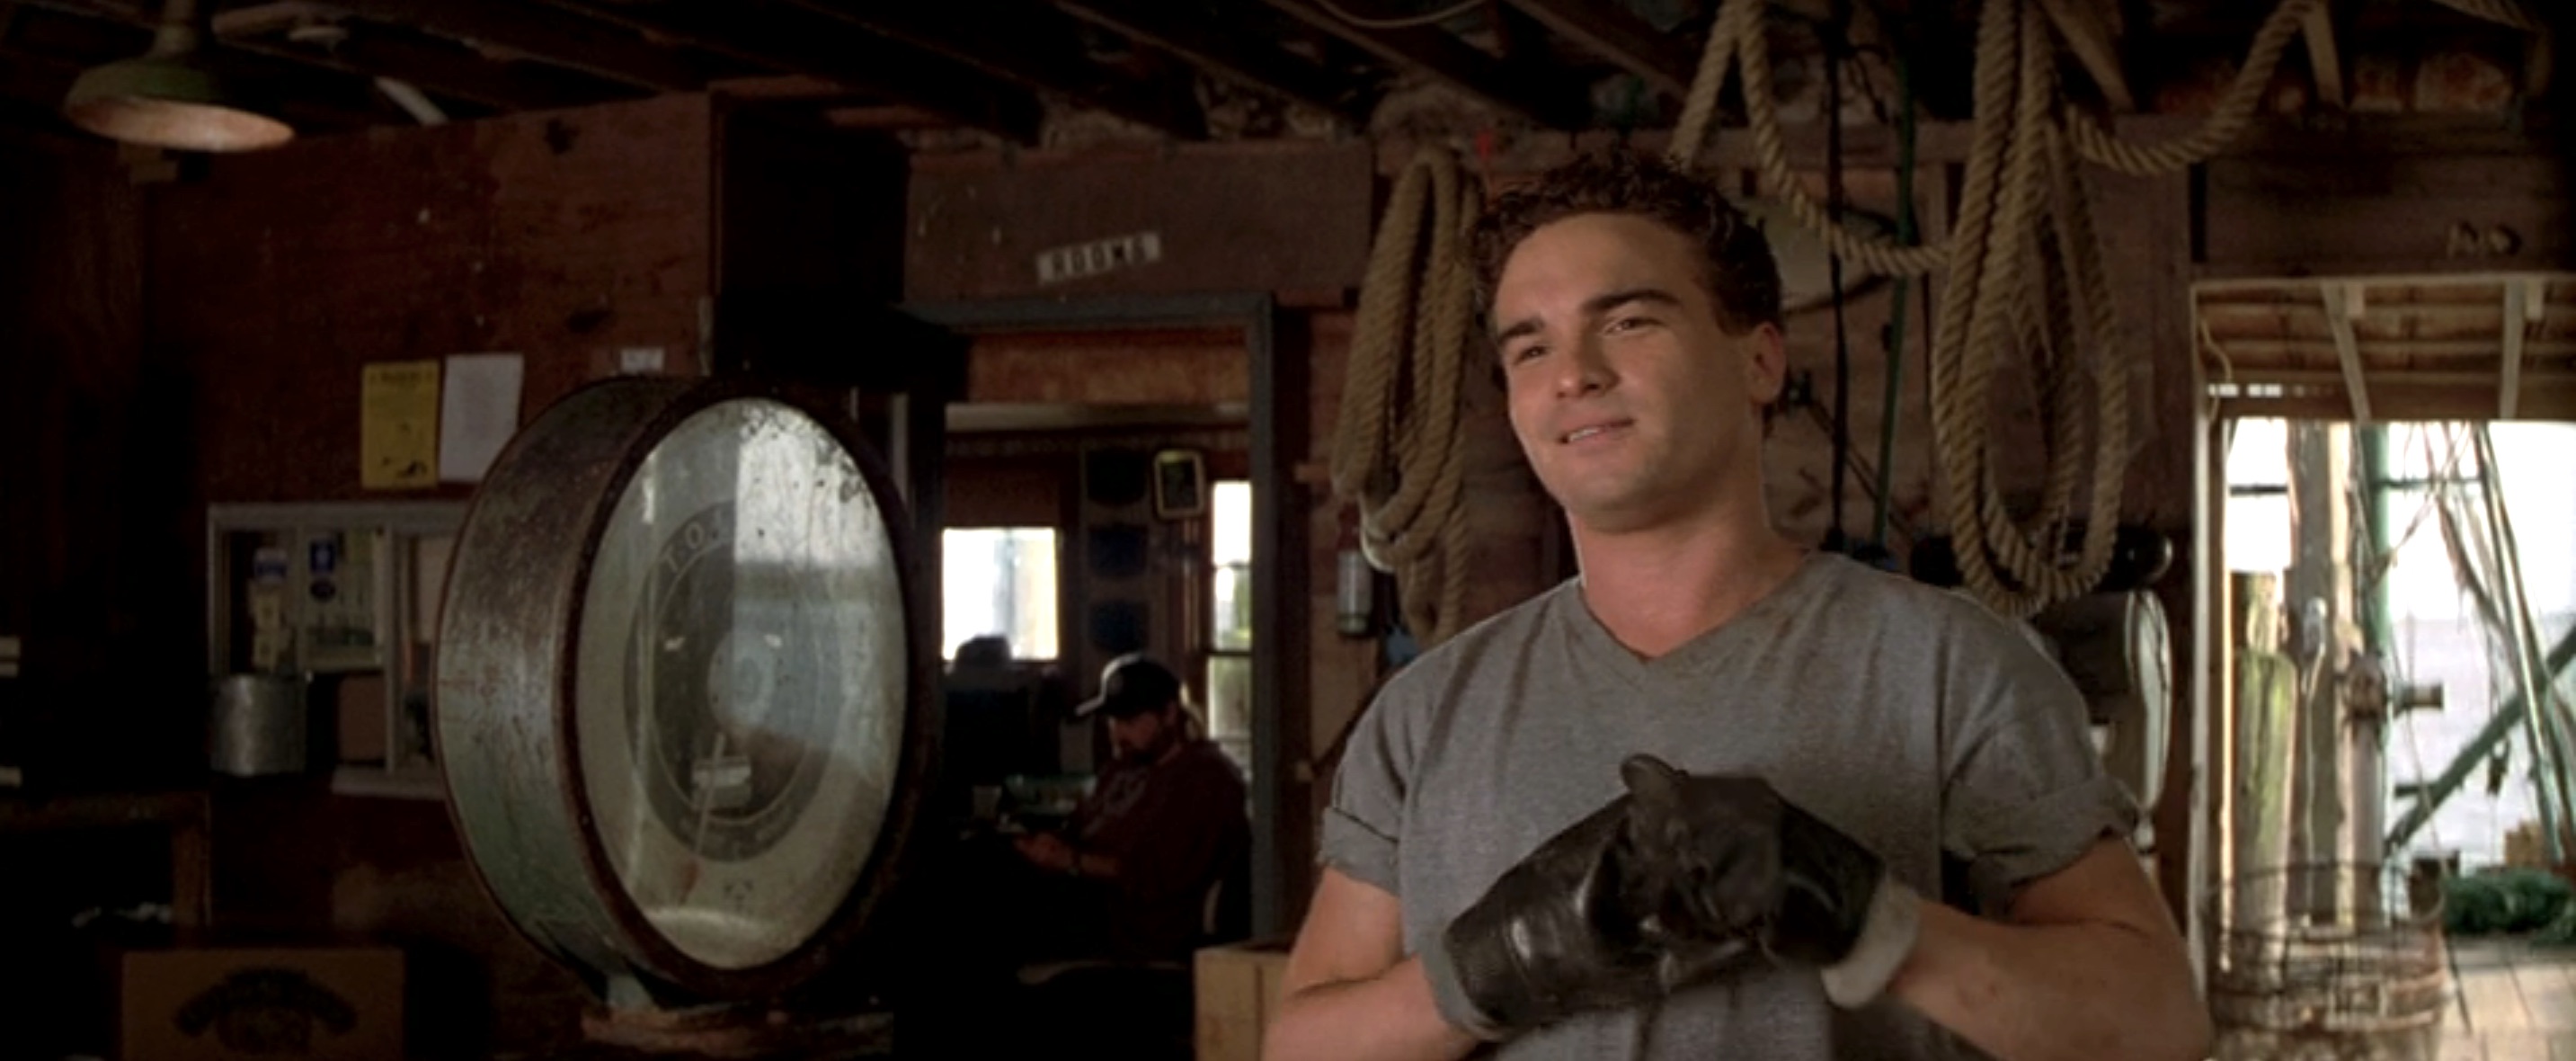 I Know What You Did Last Summer Cast - Johnny Galecki as Max Neurick